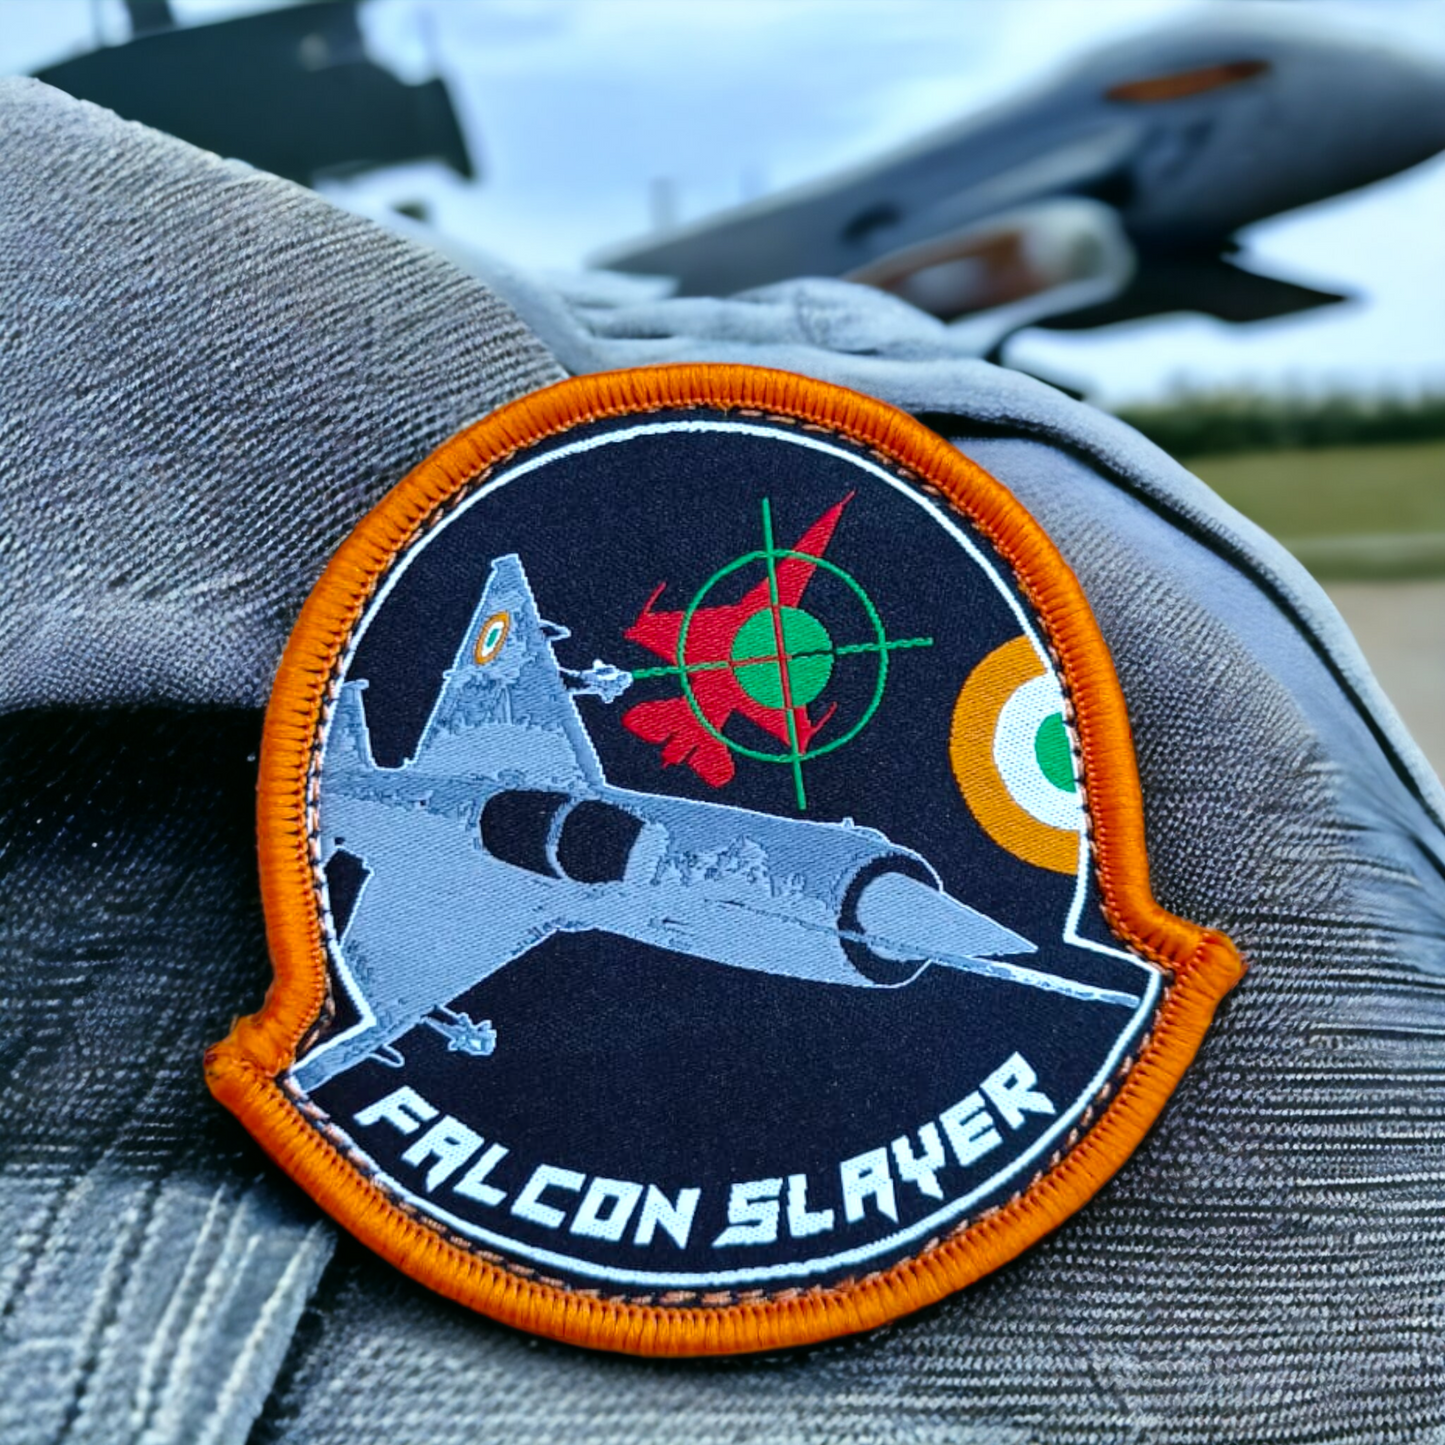 falcon slayer velcro patches for jackets